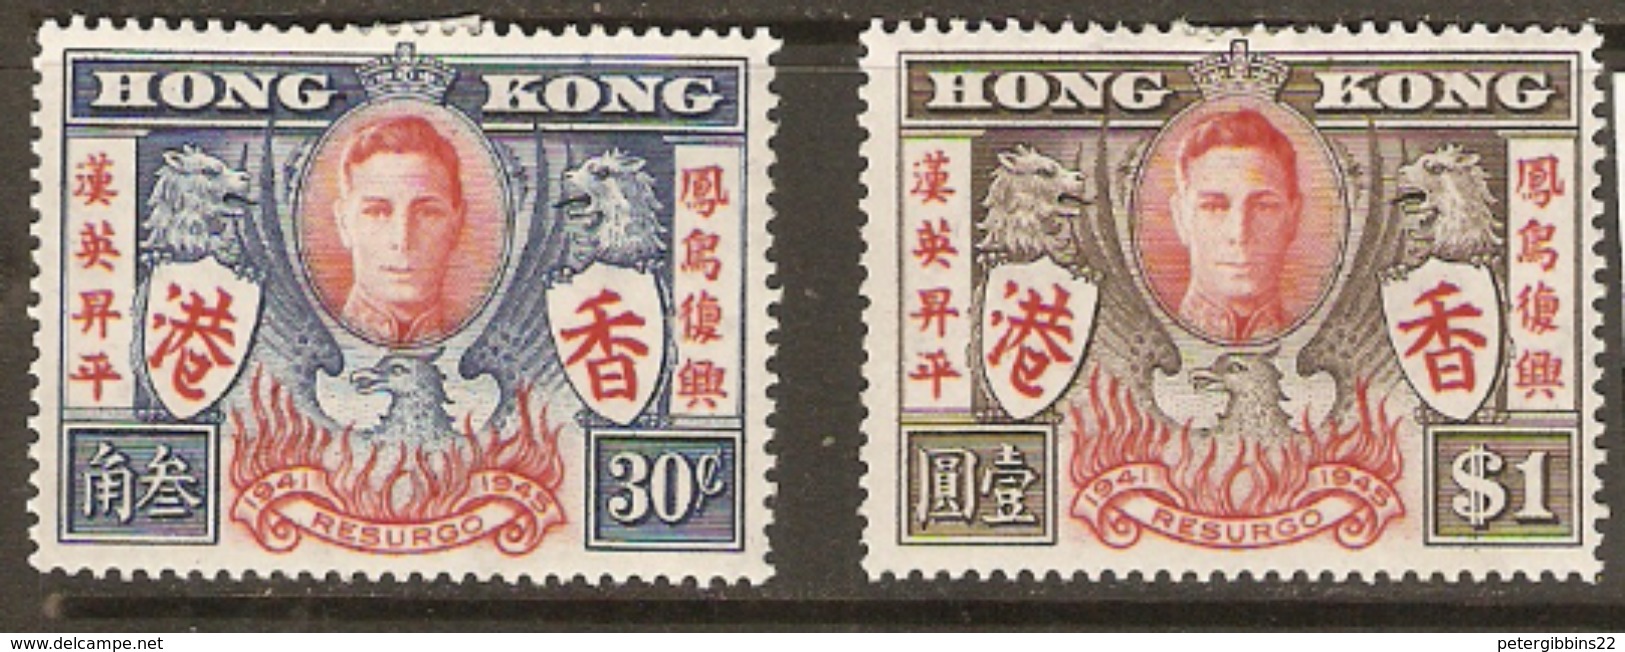 Hong Kong 1946 SG 169-70 Victory Mounted Mint - Unused Stamps